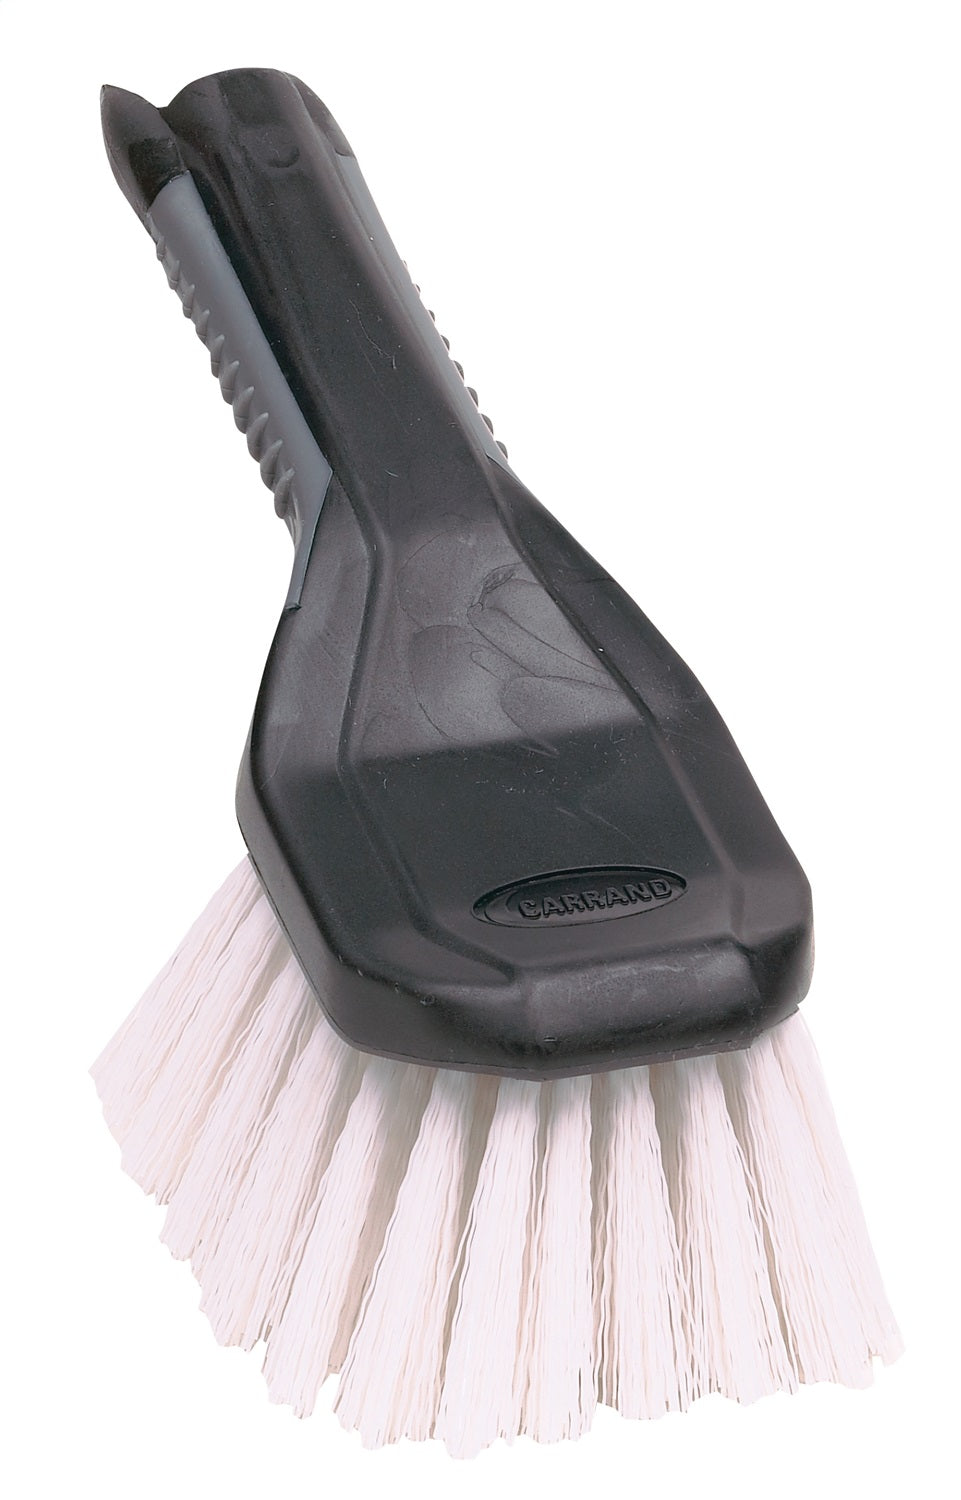 Carrand 93036 Tire And Grill Brush